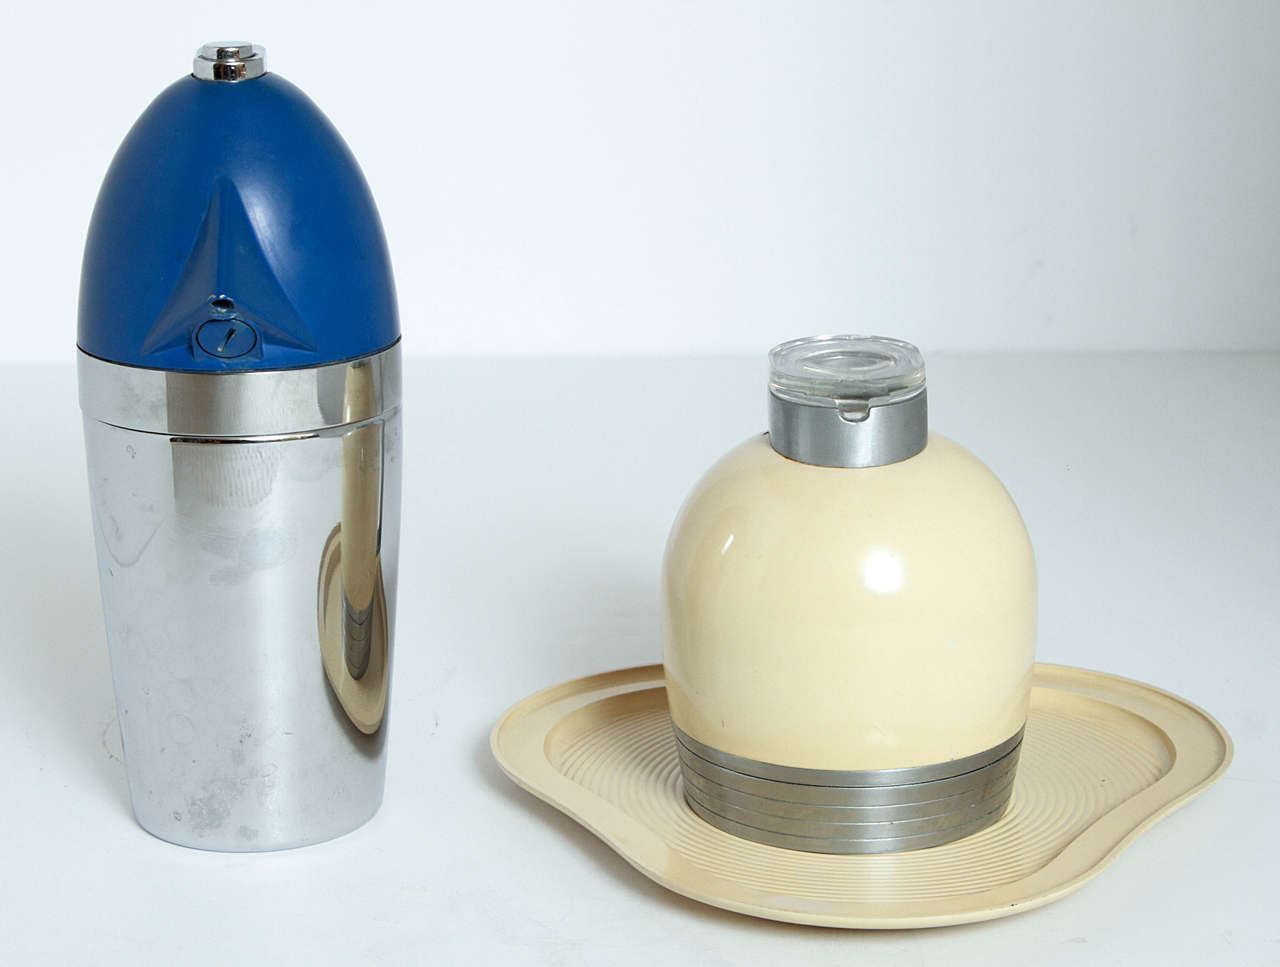 Iconic streamline machine age art deco design examples:

Relatively uncommon in blue, original soda king cocktail siphon for Walter Kidde by Bel Geddes and Worthen Paxton. Patent issued to Paxton for Kidde in 1938, an original associate in Bel